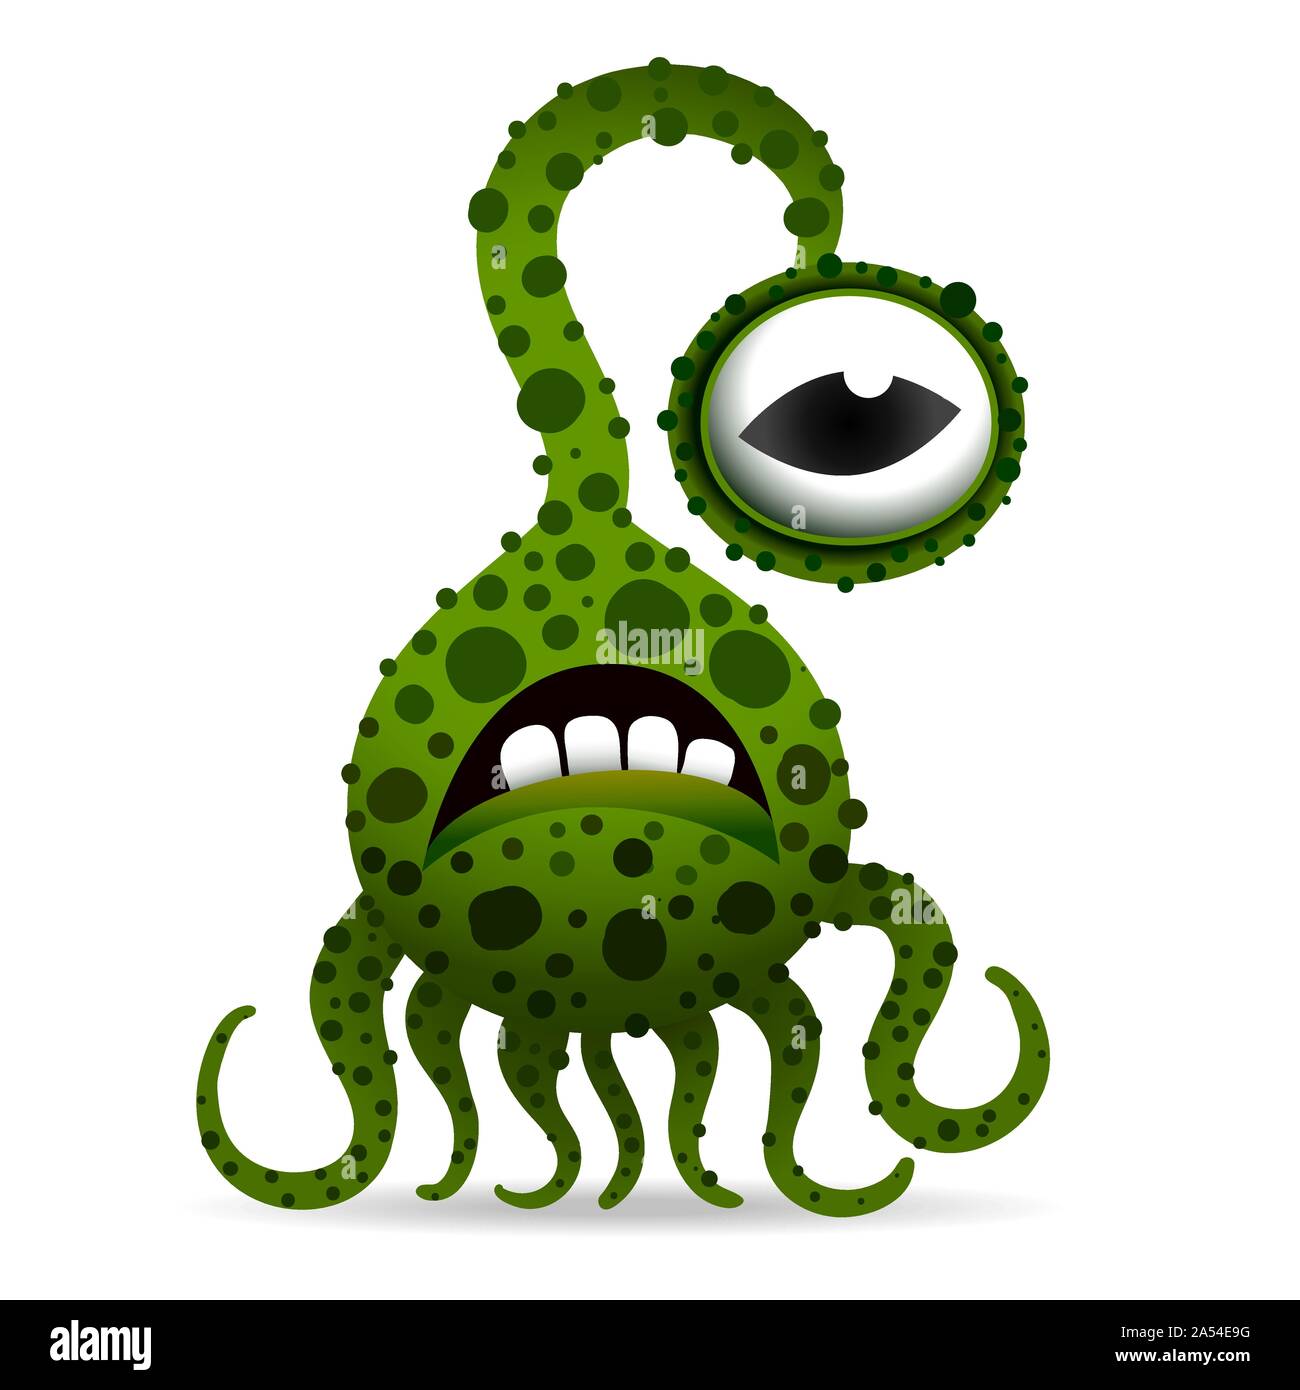 Funny and scary bacteria monster with tentacles, cartoon children s toy hero for Halloween, isolated on white background. Toothy green alien with only Stock Vector